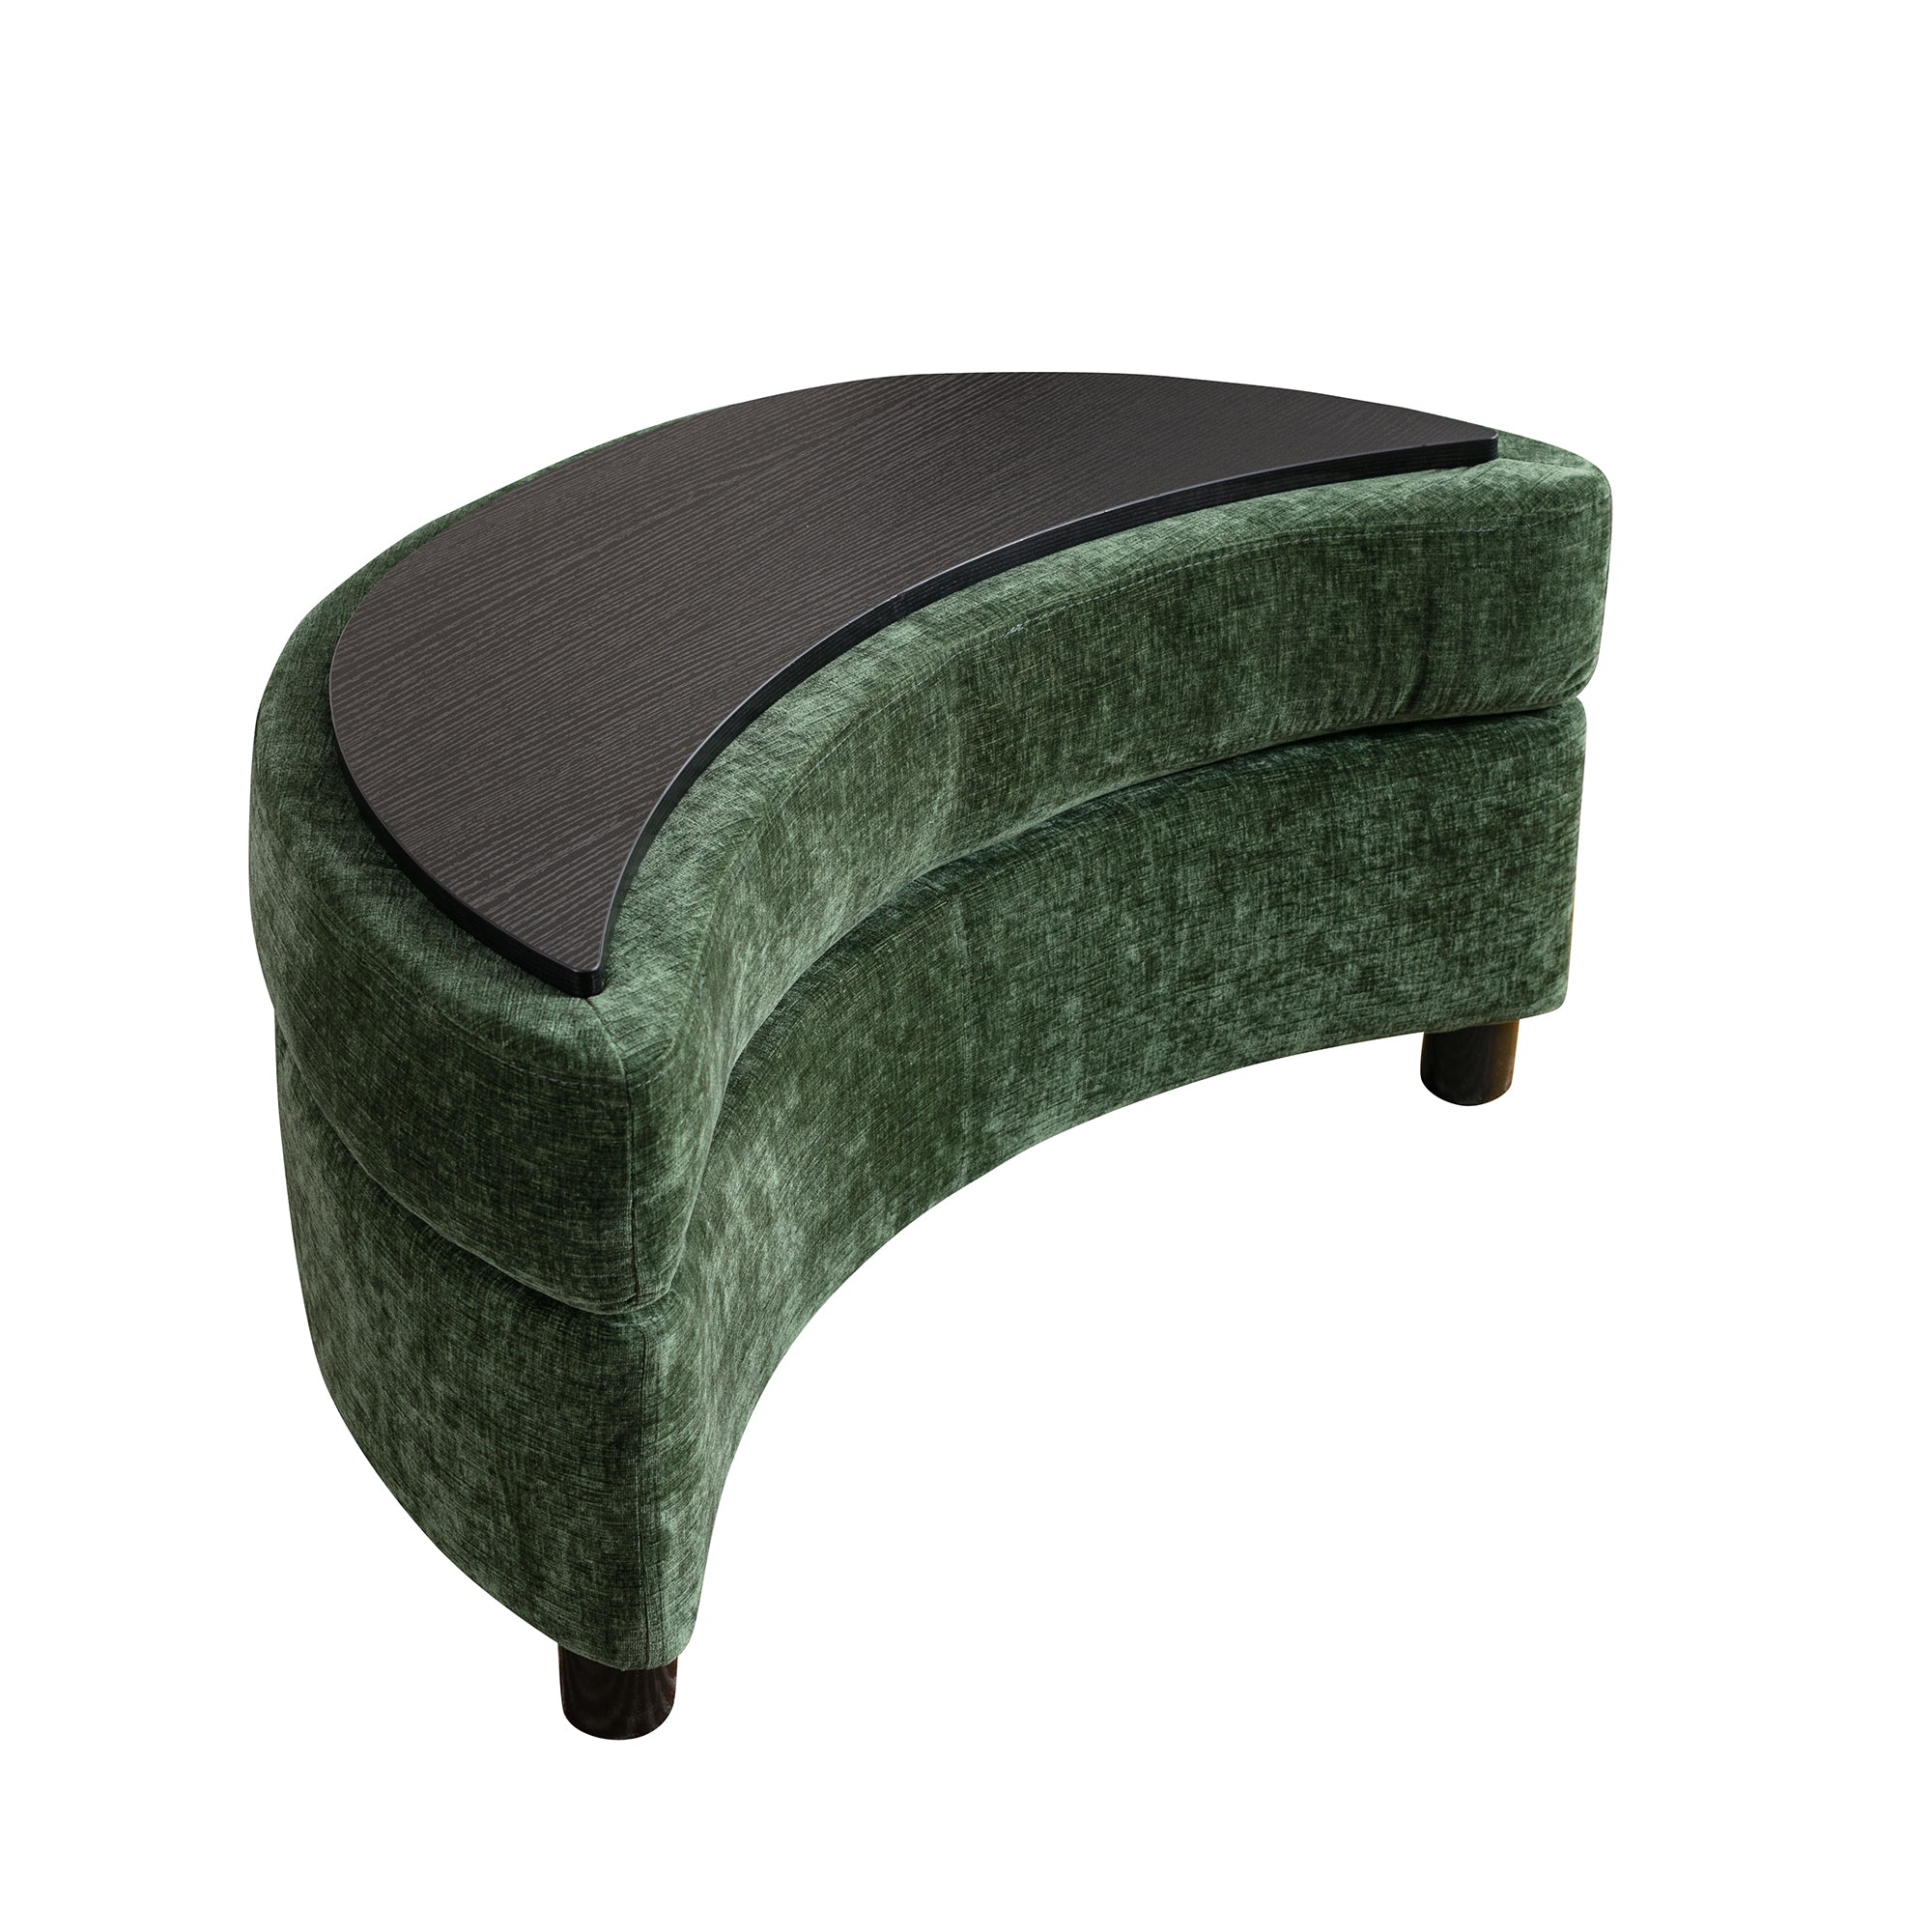 NOBLEMOOD 32.7" W Half Crescent Moon Storage Bench Large Upholstered Sofa Ottoman w/ Tray Serve for Living Room, Entryway, Hallway（Green）